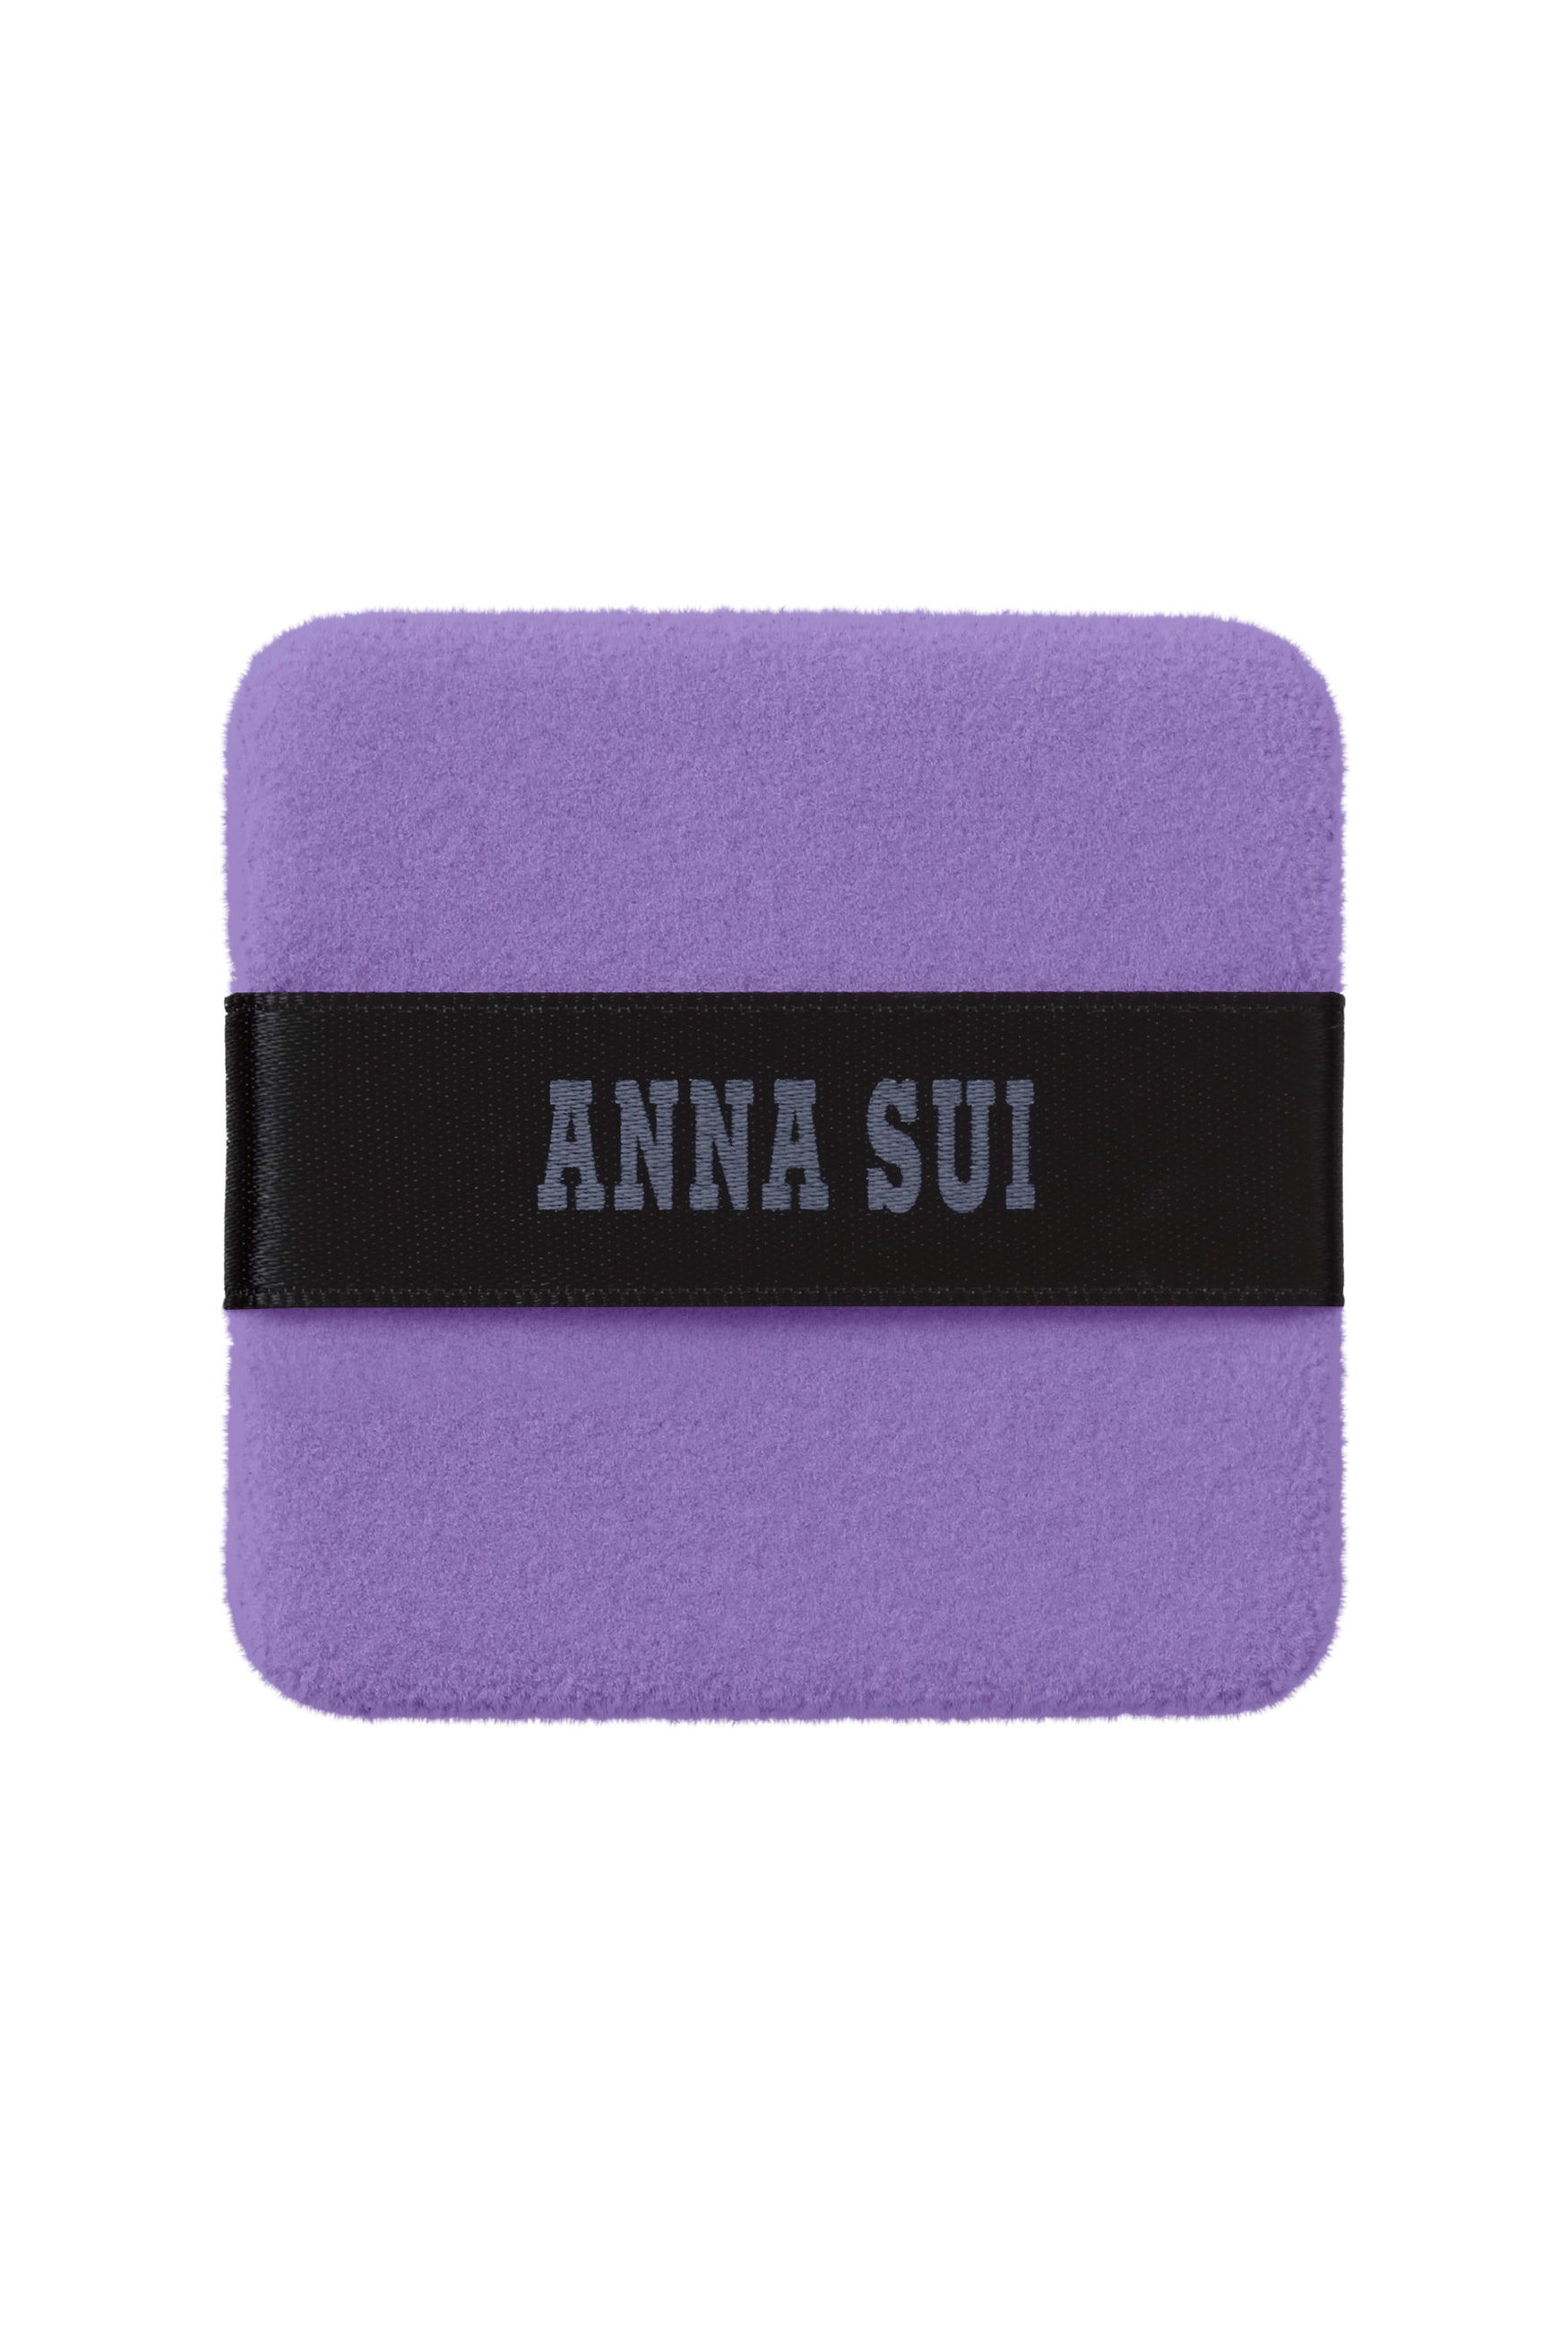 The Anna Sui Mini Puff is perfect for applying the Pressed Face Powder, violet with a black ribbon, measures 54/54/5.2 mm